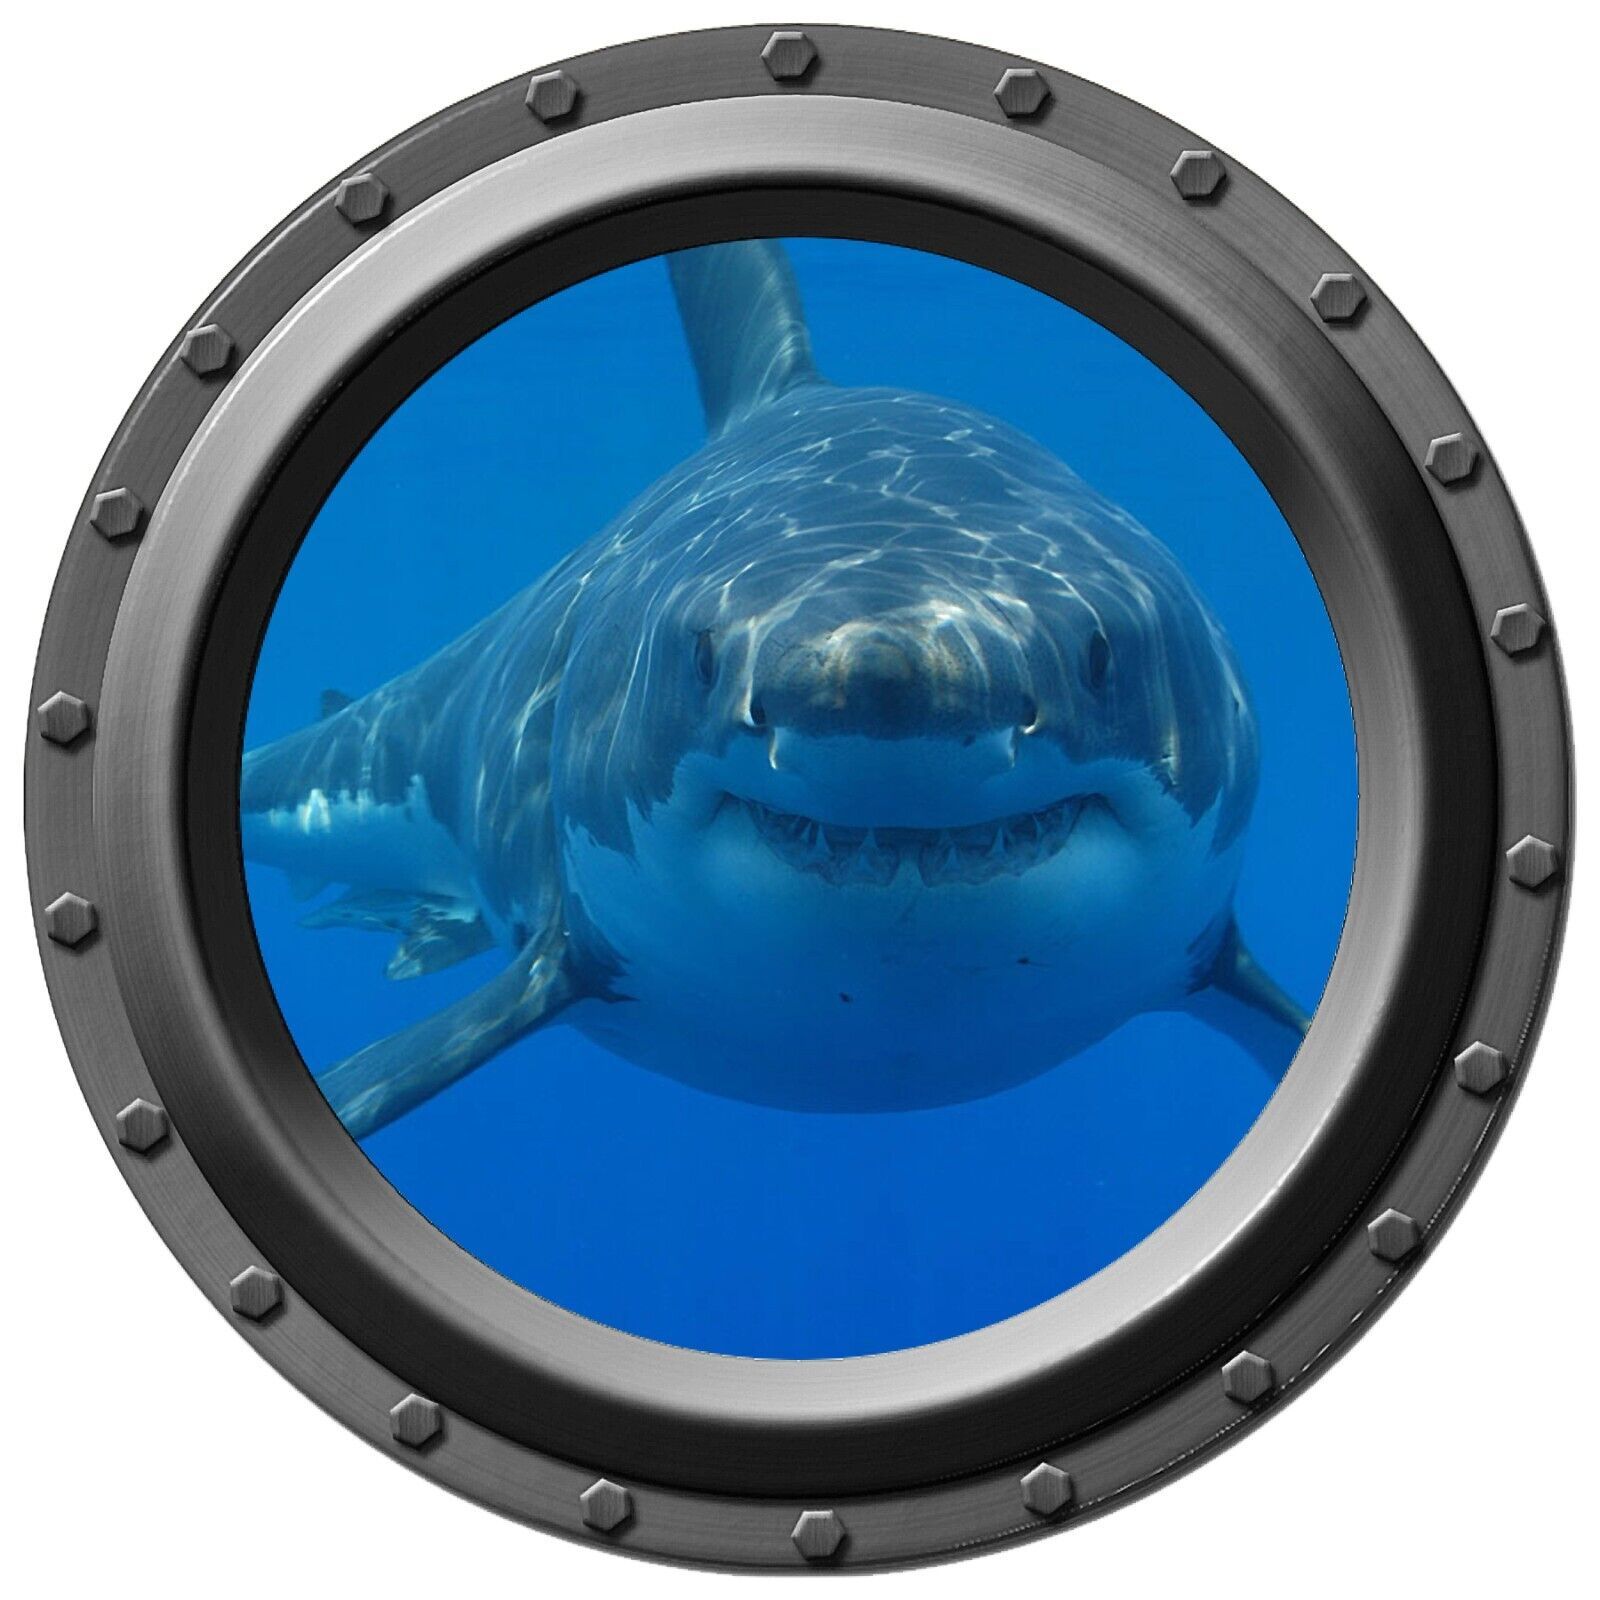 Large Hungry Shark Watches You Porthole Wall Decal - $2.97 - $41.58